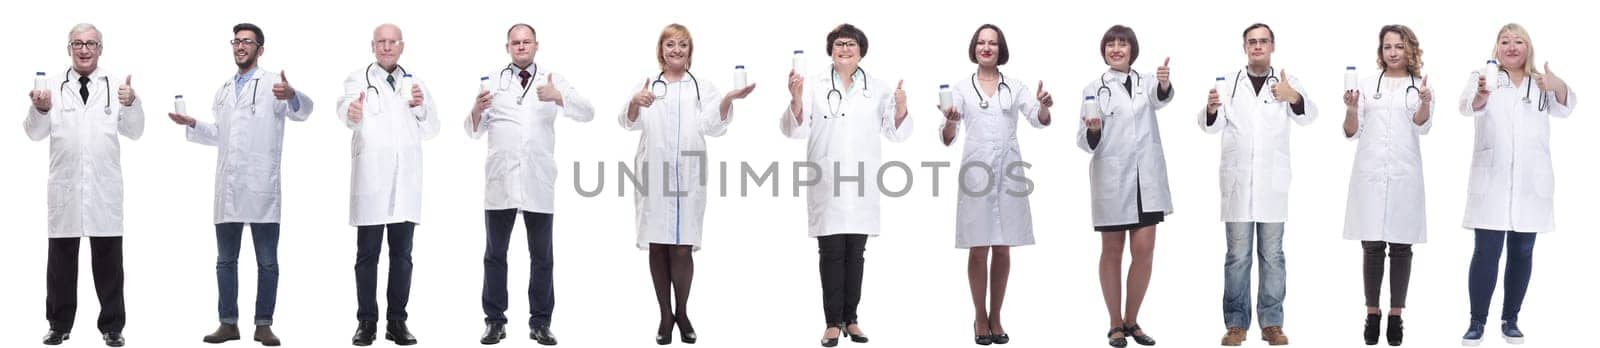 group of doctors holding jar isolated on white by asdf